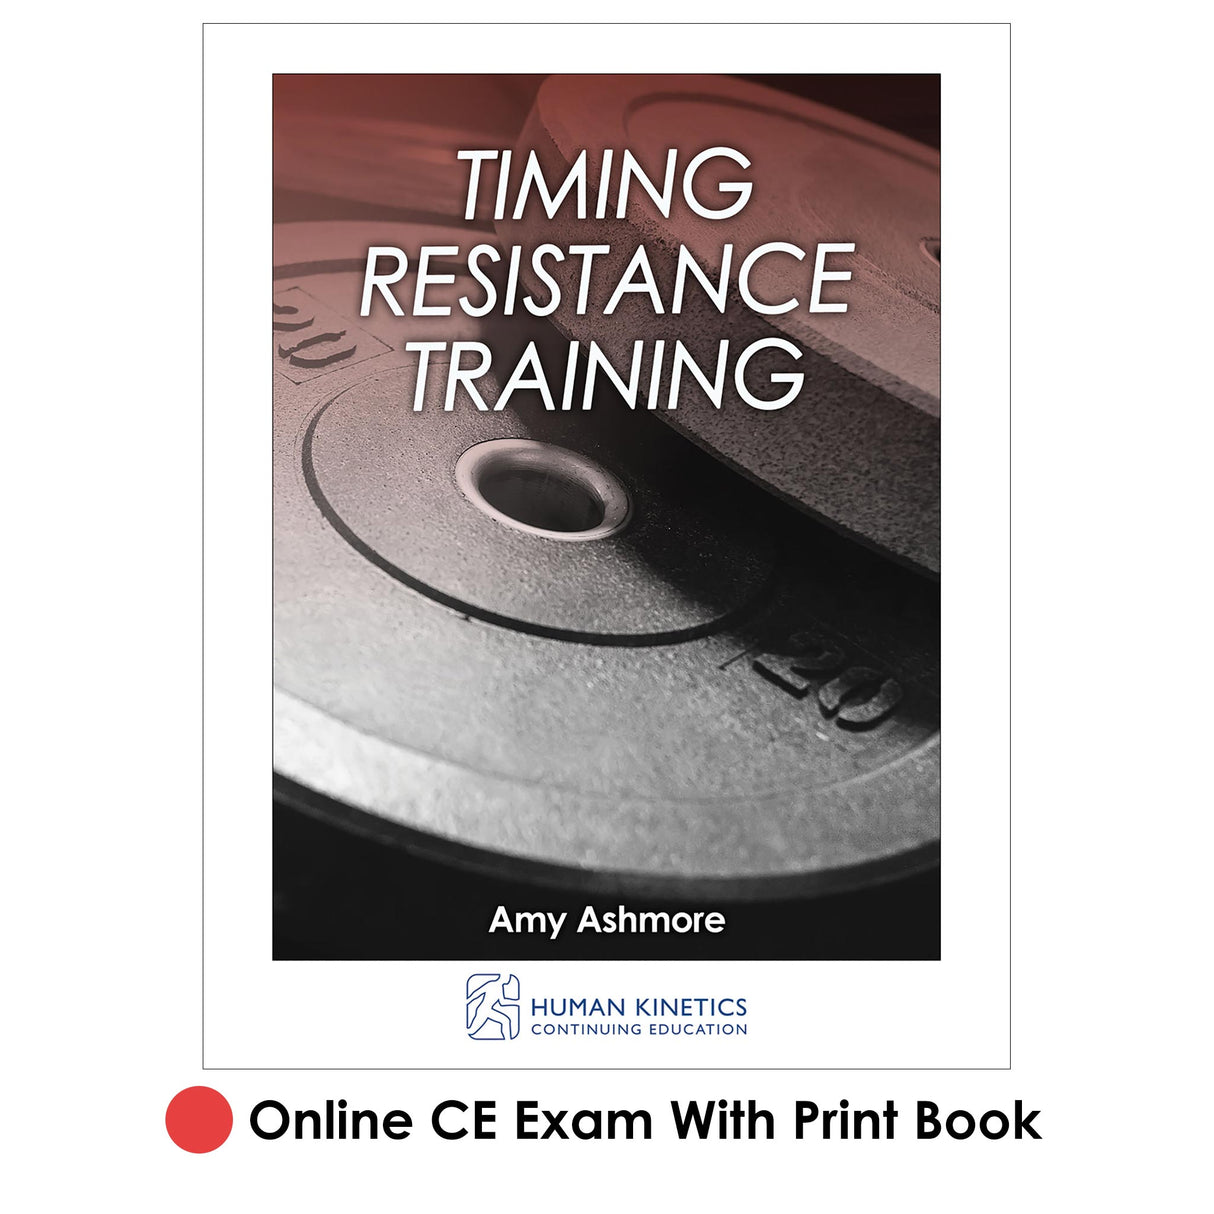 Timing Resistance Training Online CE Exam With Print Book